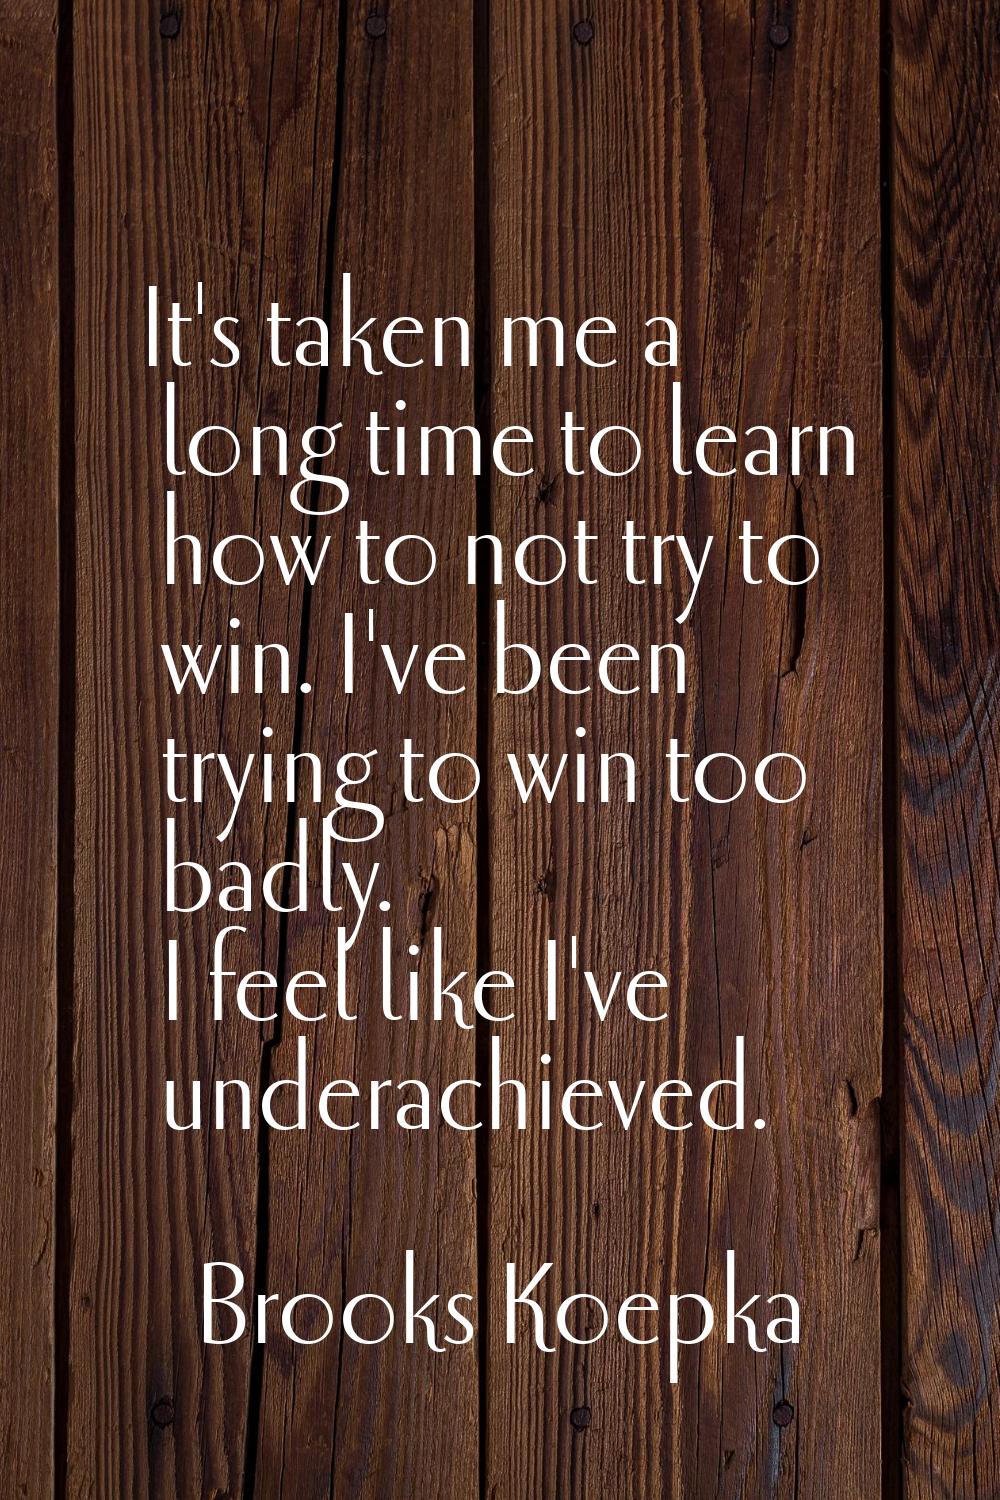 It's taken me a long time to learn how to not try to win. I've been trying to win too badly. I feel